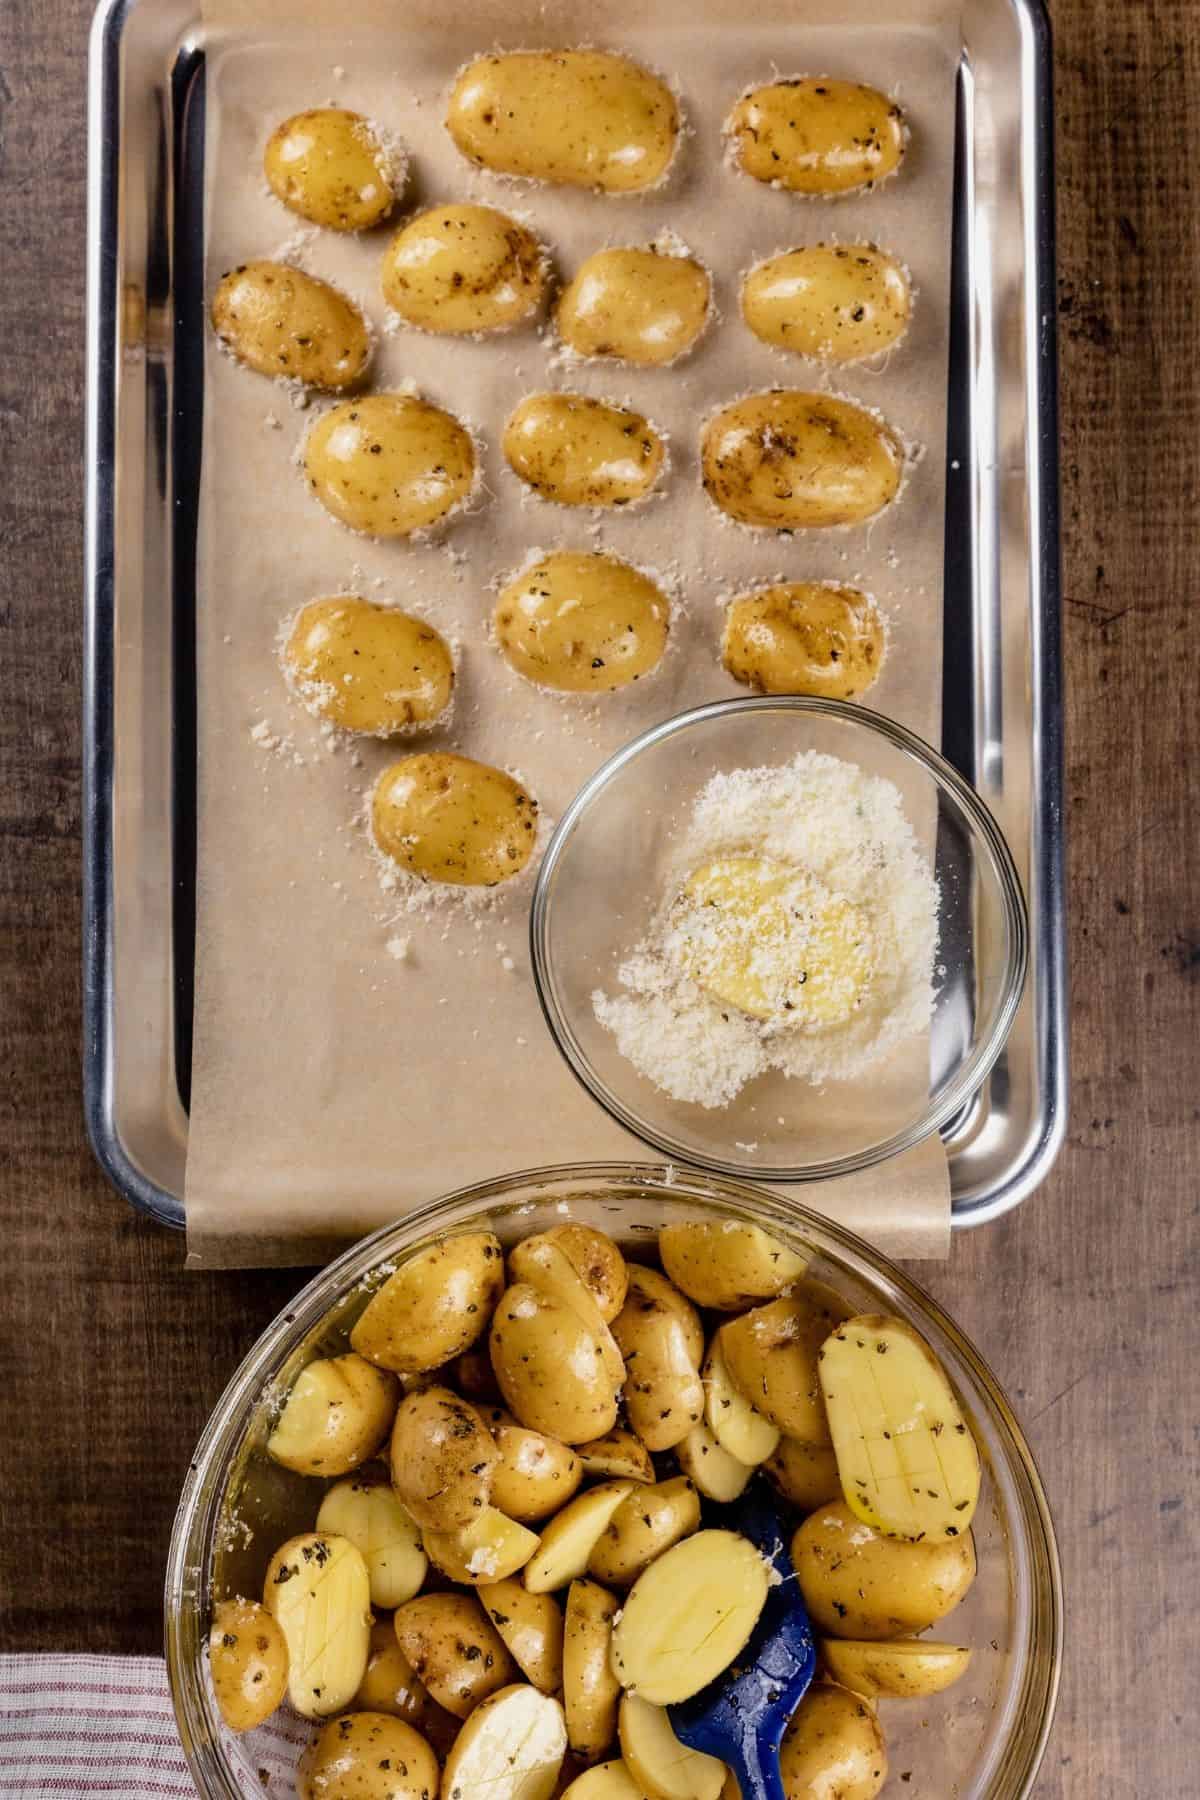 halved potatoes being dipped in parmesan cheese and then placed on a parchment paper lined baking sheet.